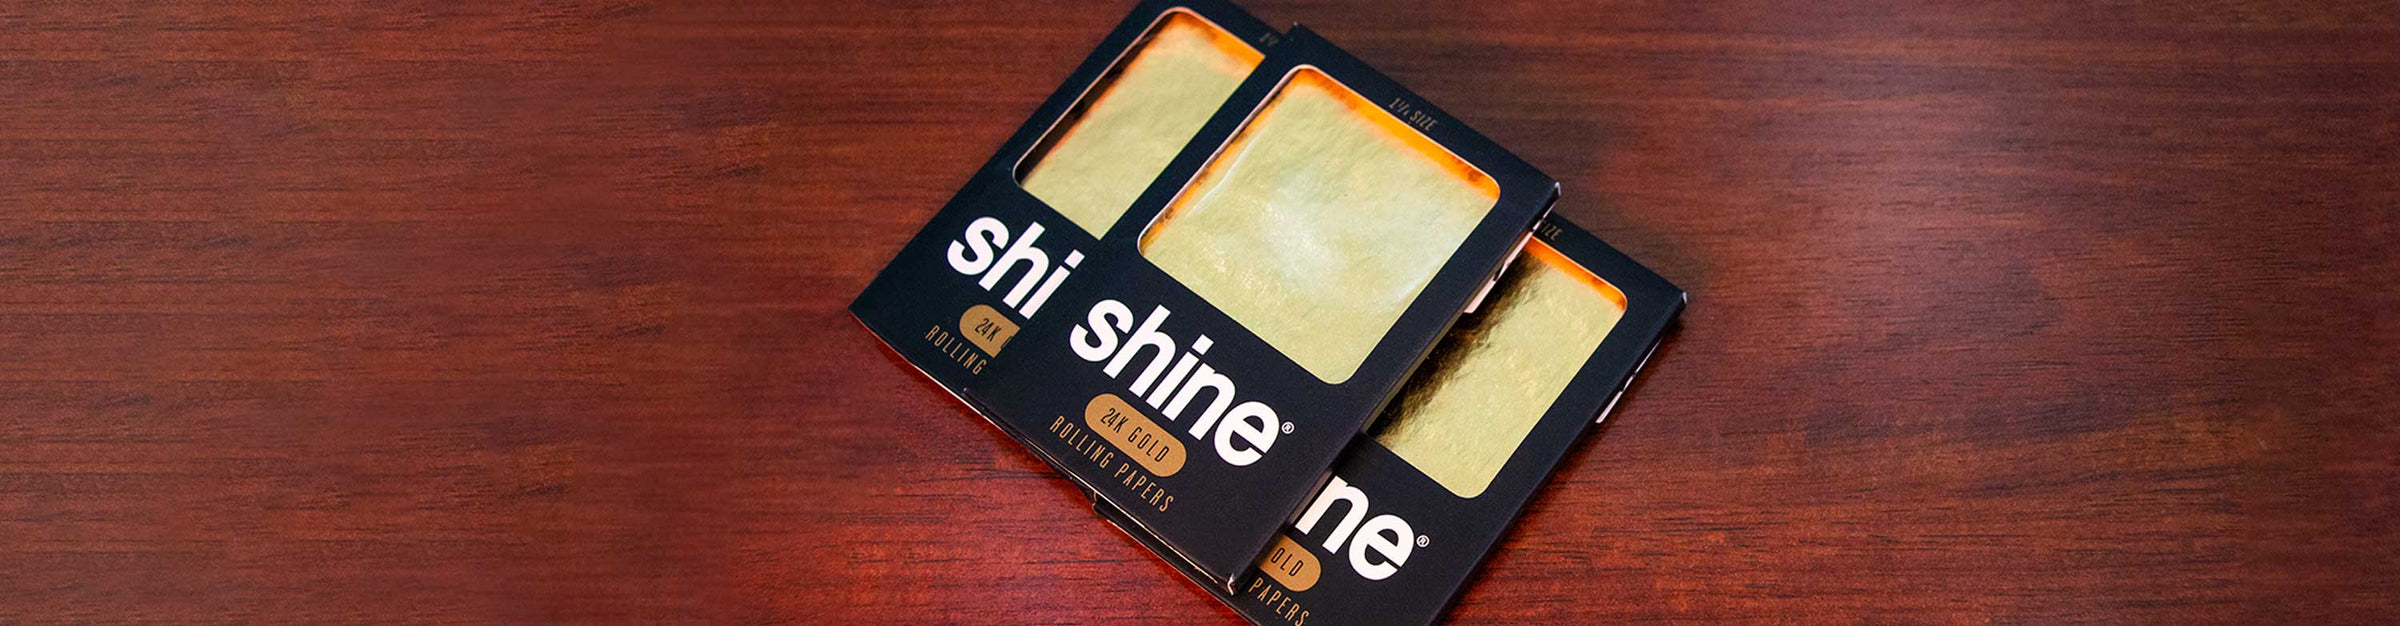 Shine Gold Wraps laying down on wooden table inside office building.